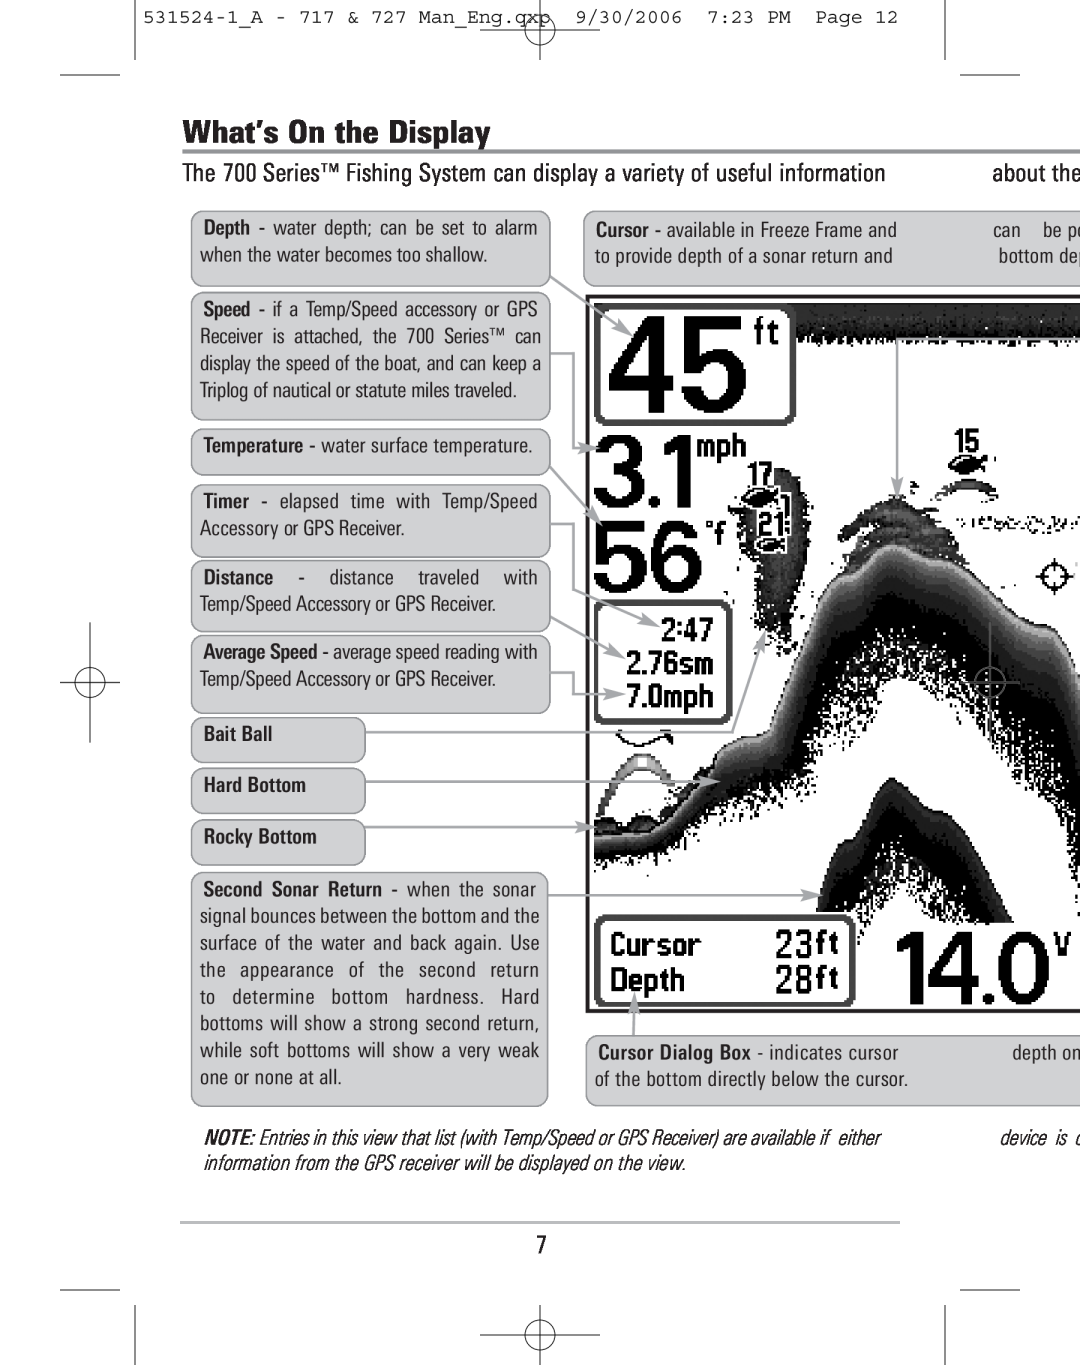 Humminbird manual What’s On the Display, 531524-1A - 717 & 727 ManEng.qxp 9/30/2006 723 PM Page, can be po, bottom de 